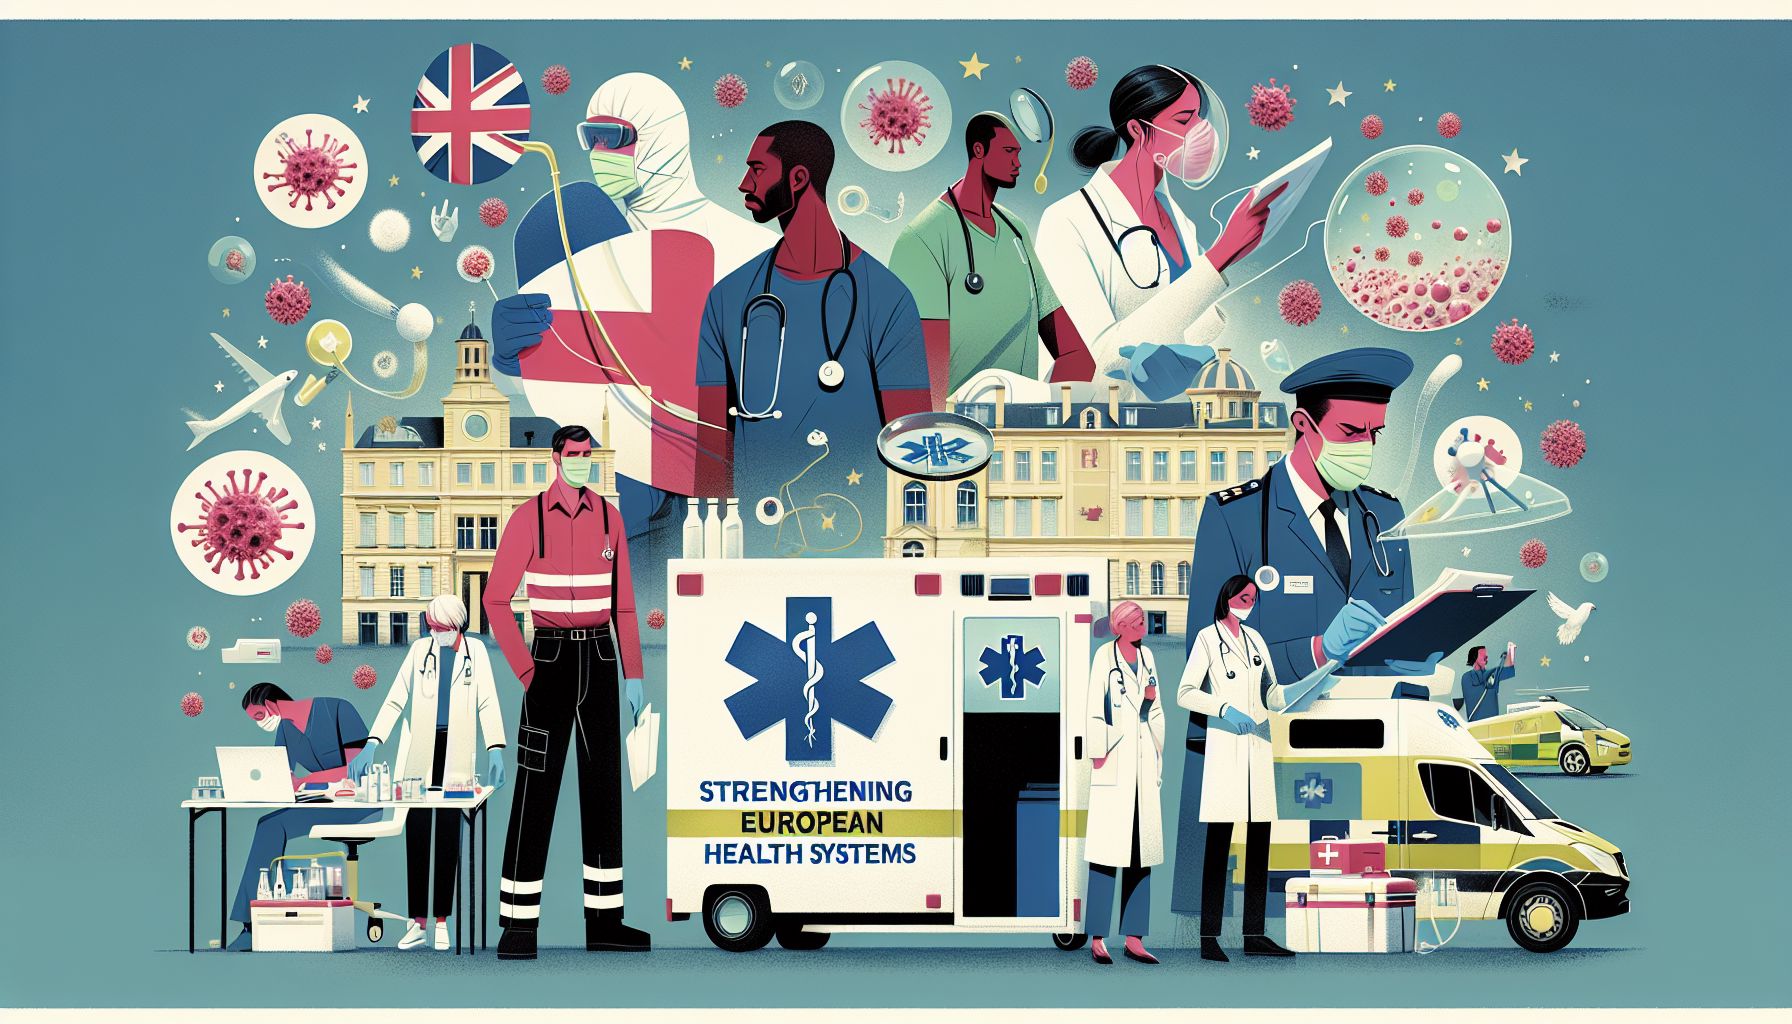 Strengthening European Health Systems: A Call to Action for Preparedness and Response